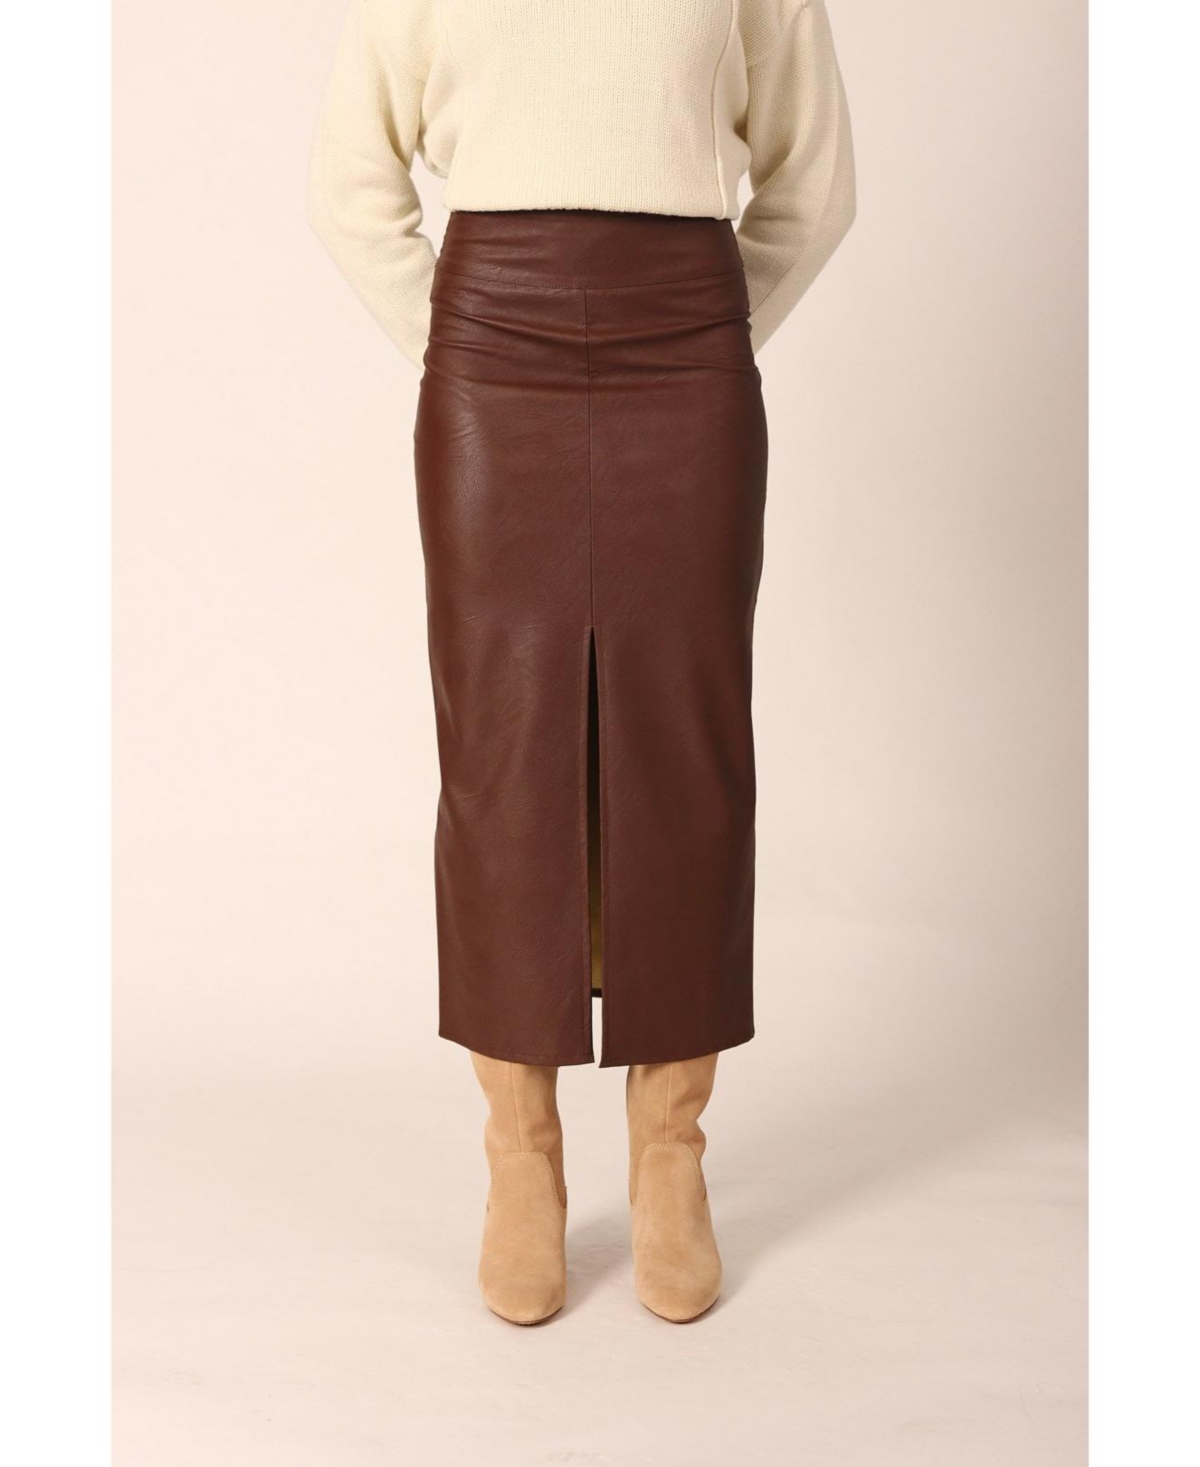 Women's Faux Leather Midi Skirt With Slit - Chocolate